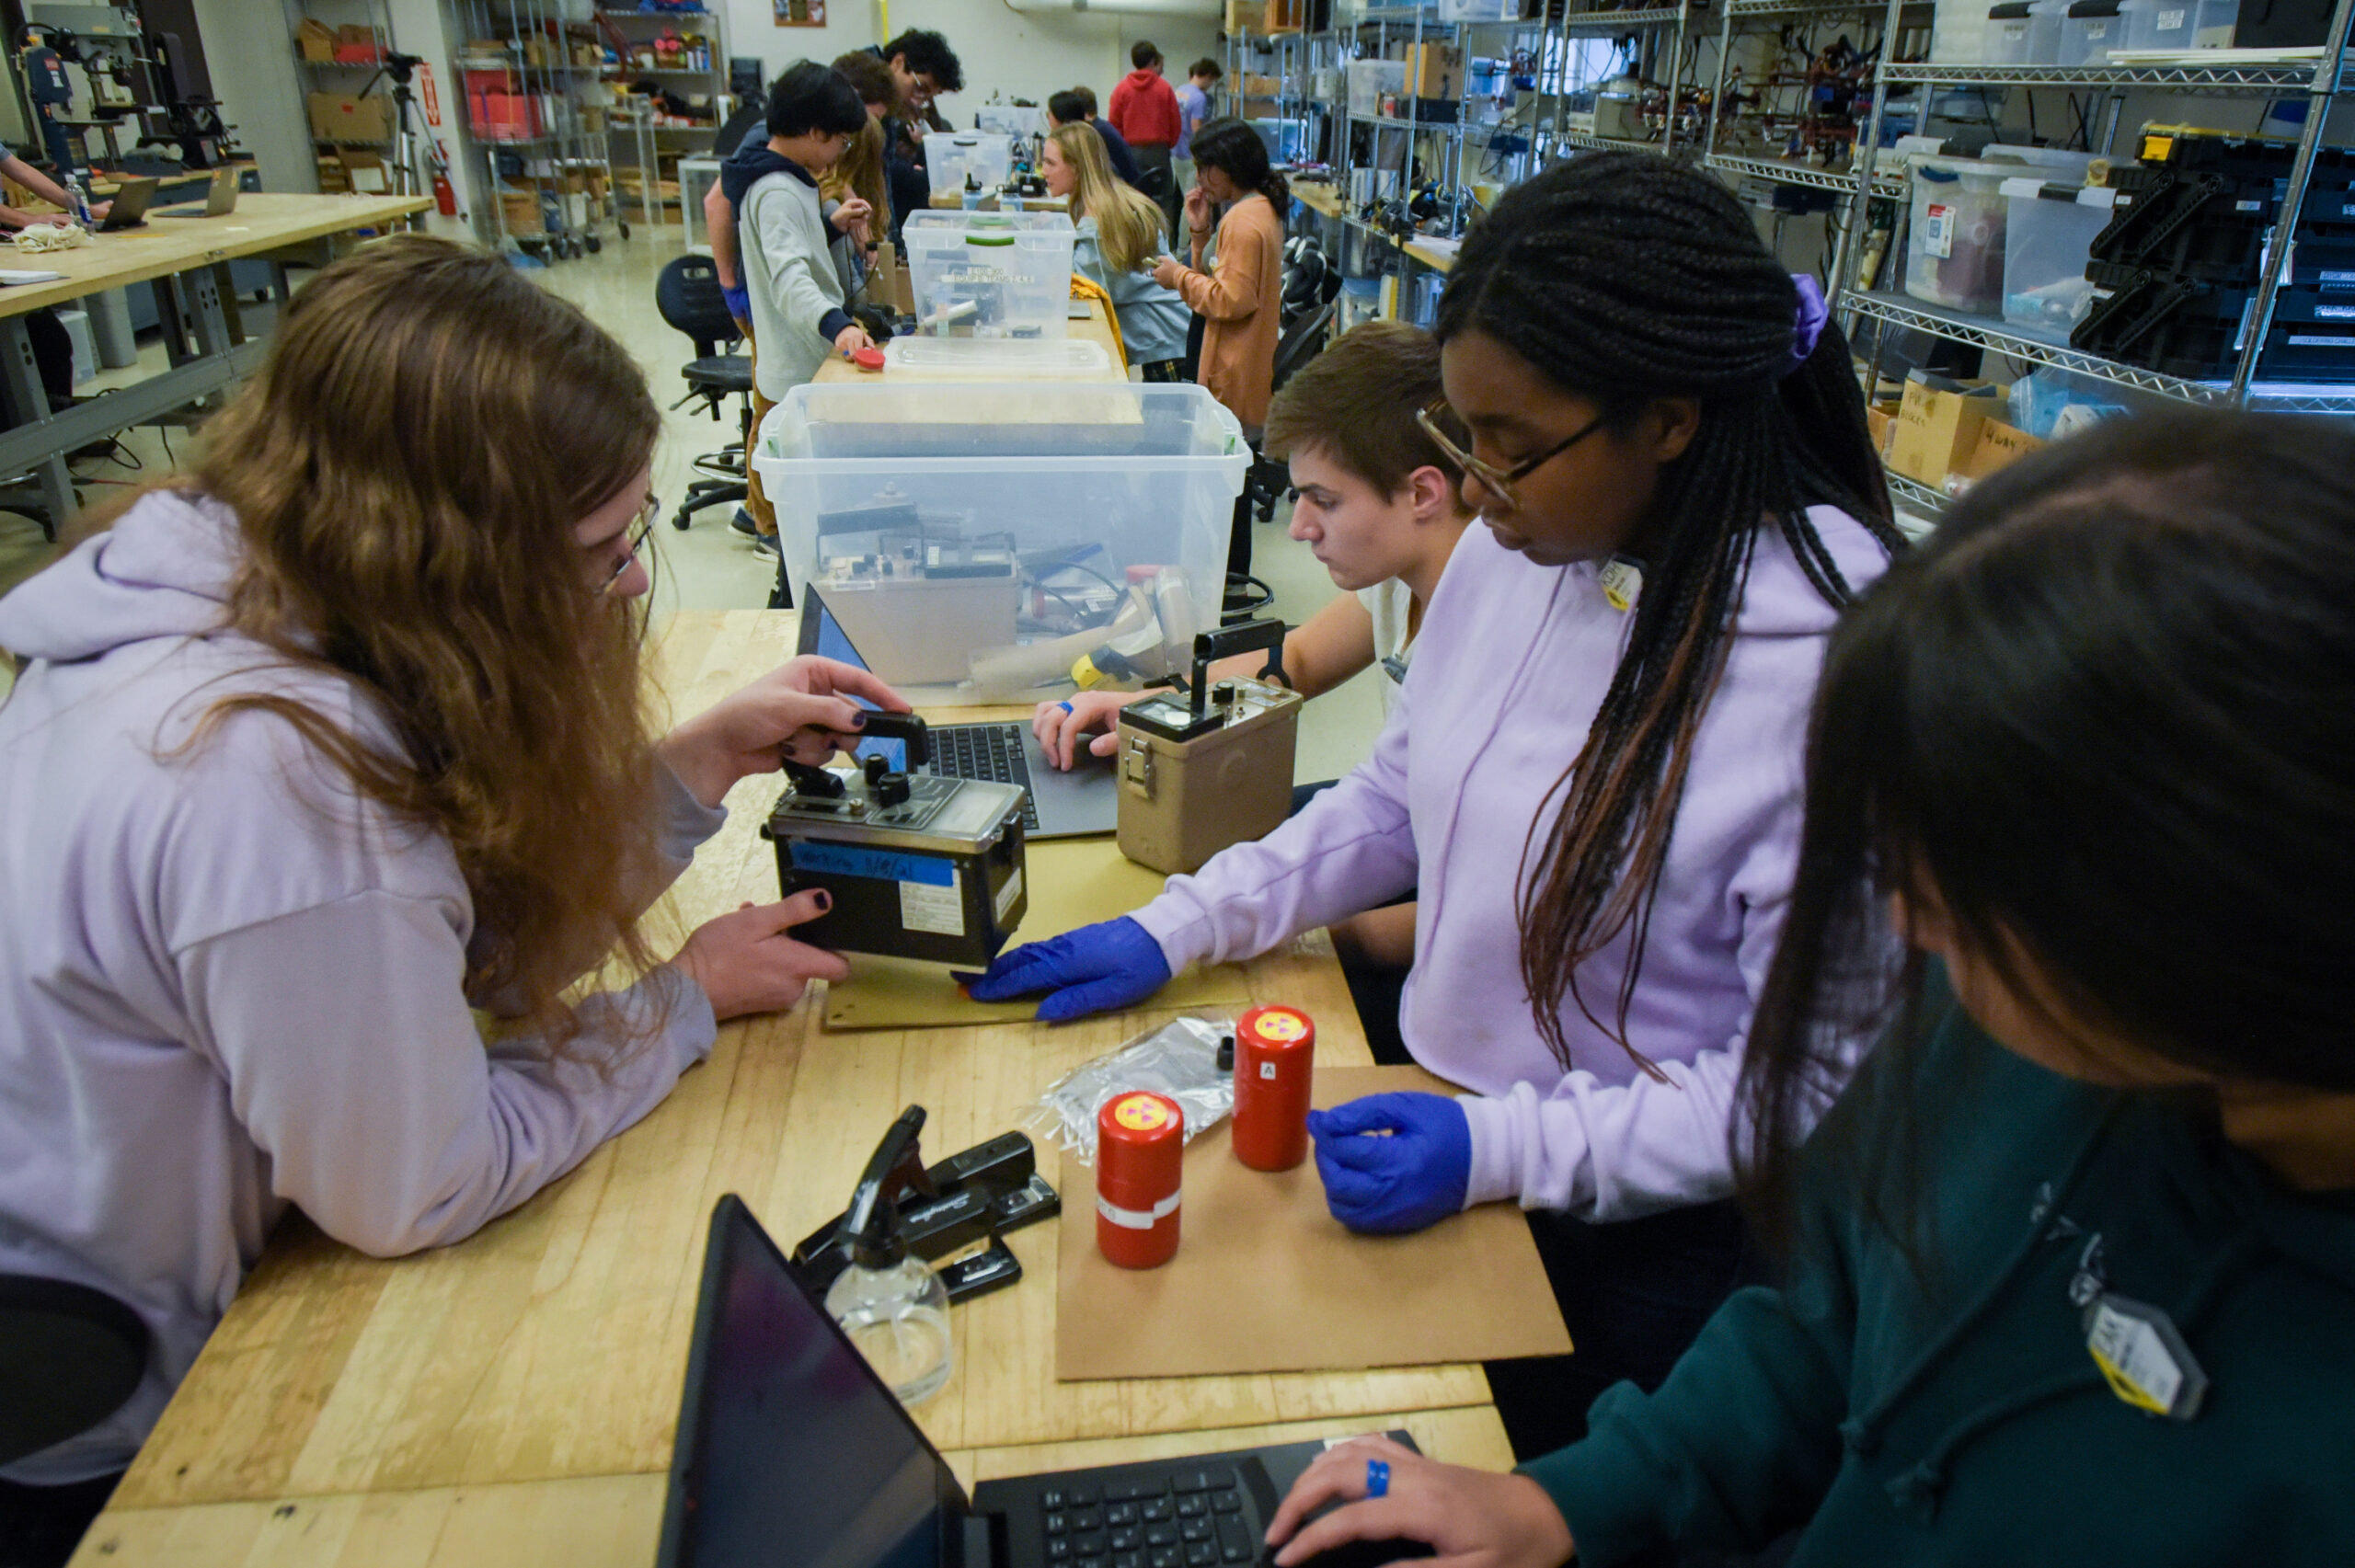 Group of students working with Geiger Counter at workbench